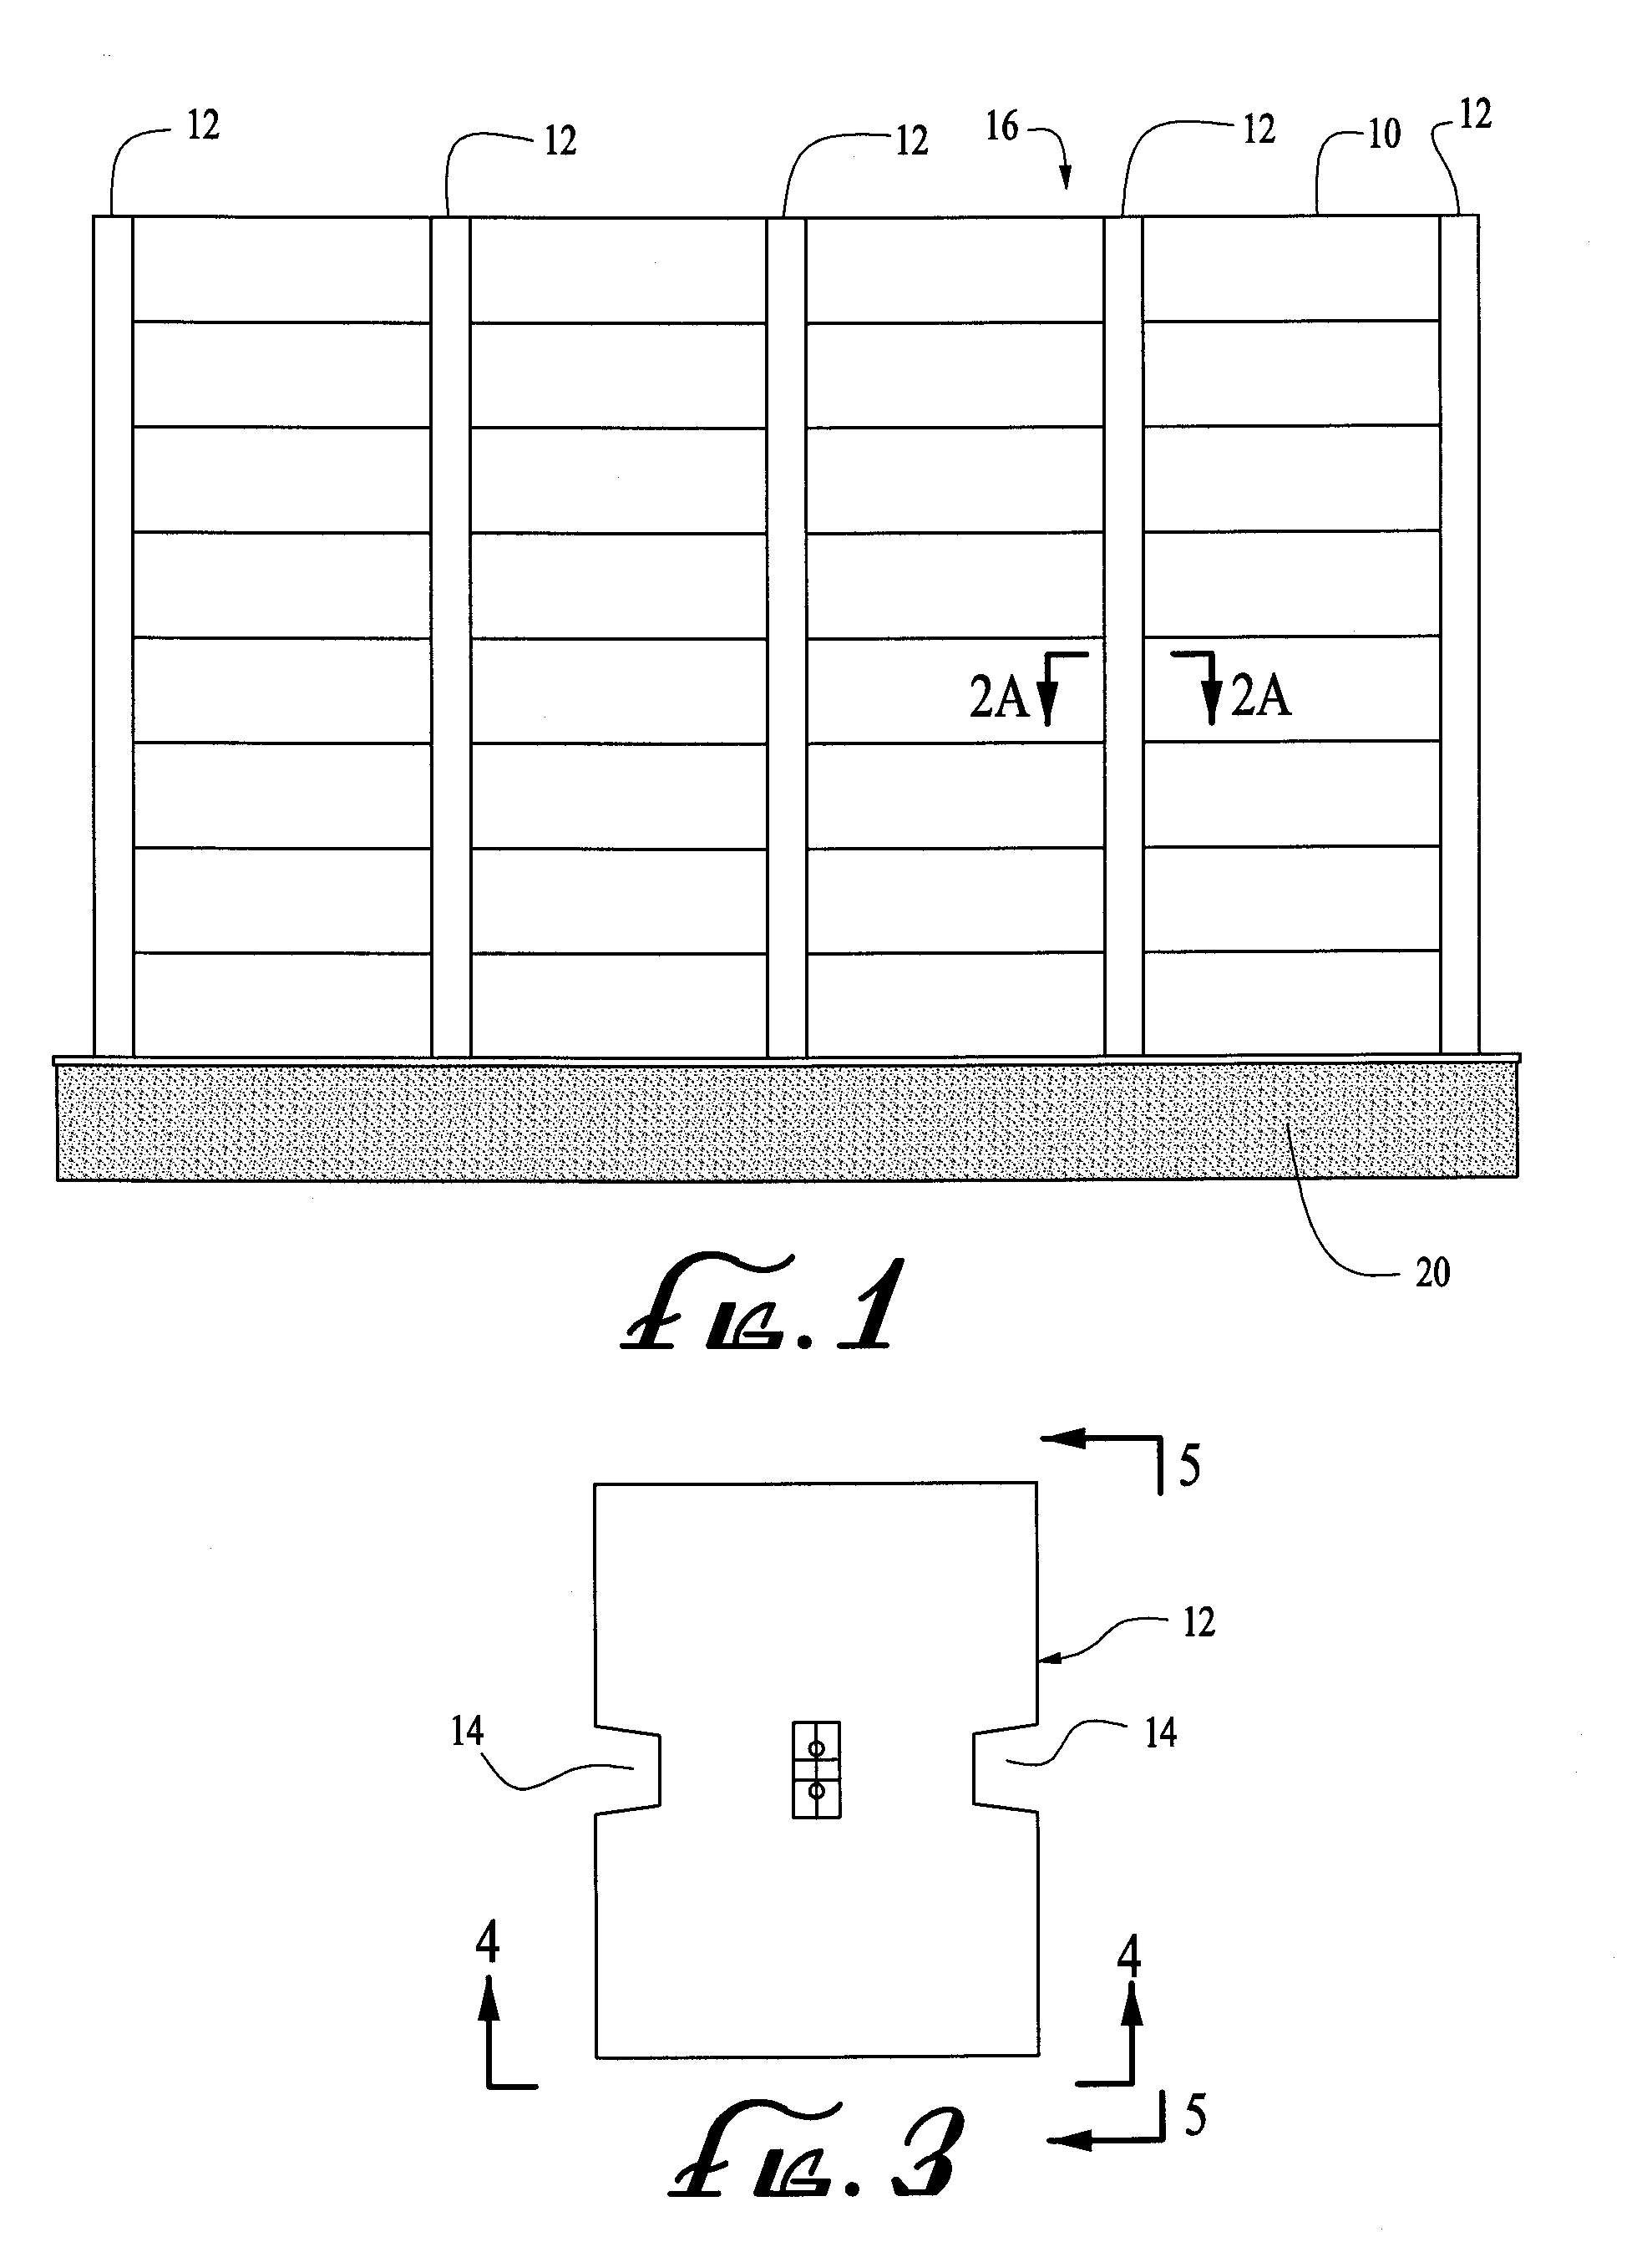 Refractory Material with Stainless Steel and Organic Fibers